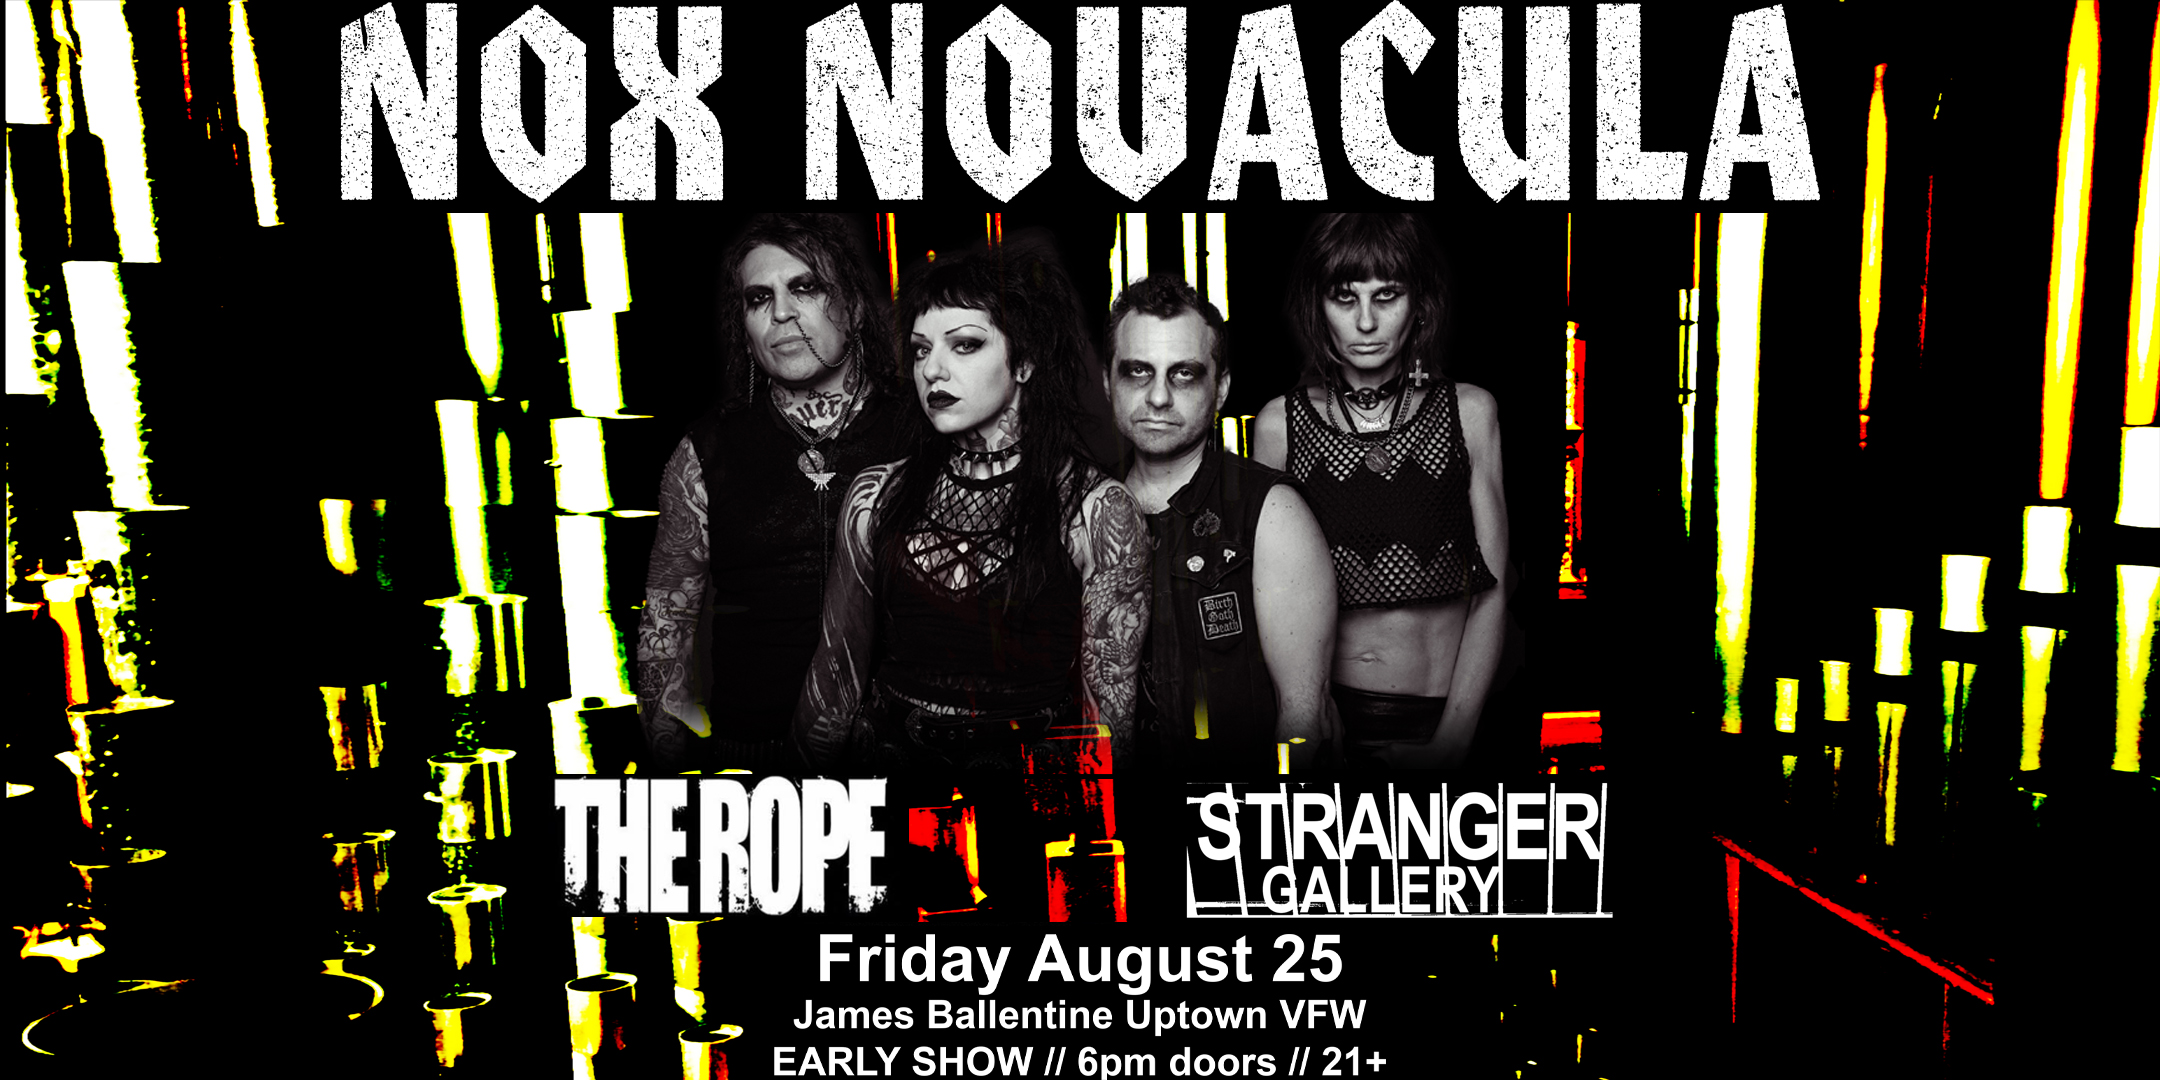 Nox Novacula with The Rope, Stranger Gallery Friday, August 25 James Ballentine "Uptown" VFW Post 246 Doors 6:00pm :: Music 7:00pm :: 21+ $12 ADV / $17 DOS TICKETS ONSALE: Friday June 16, 2023 at 10:00 AM